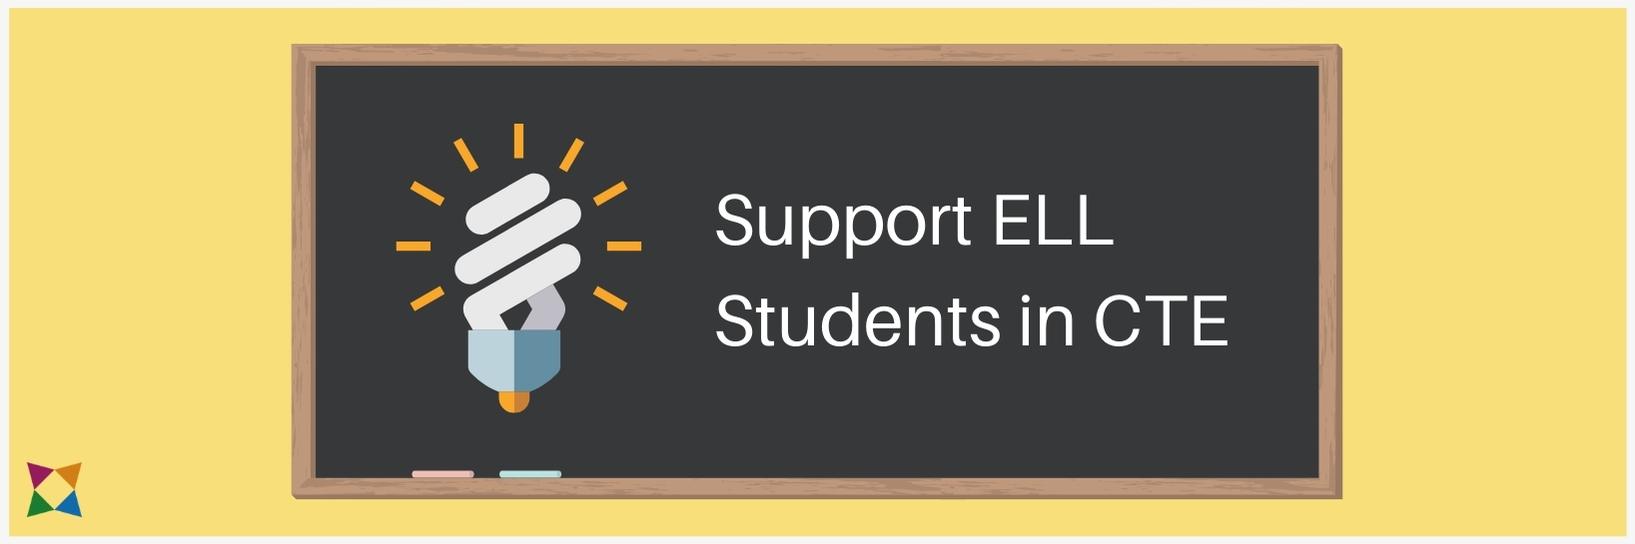 5 Steps to Support ELL Students in CTE